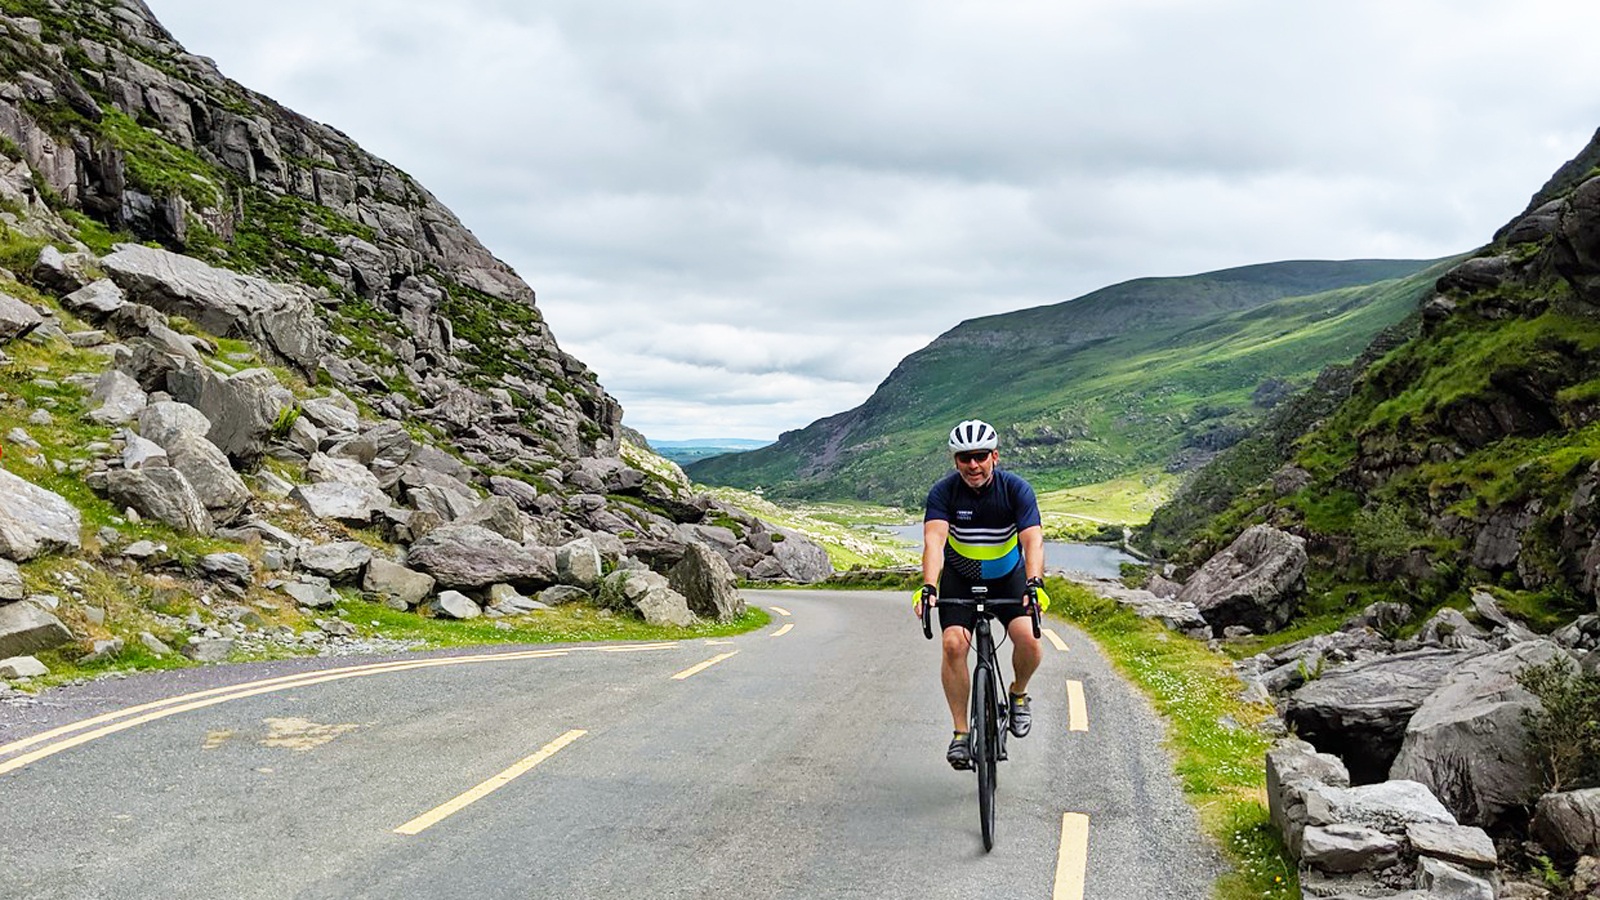 Join Trek Travel and Wilderness Ireland for an Ireland bike tour and cycling vacation